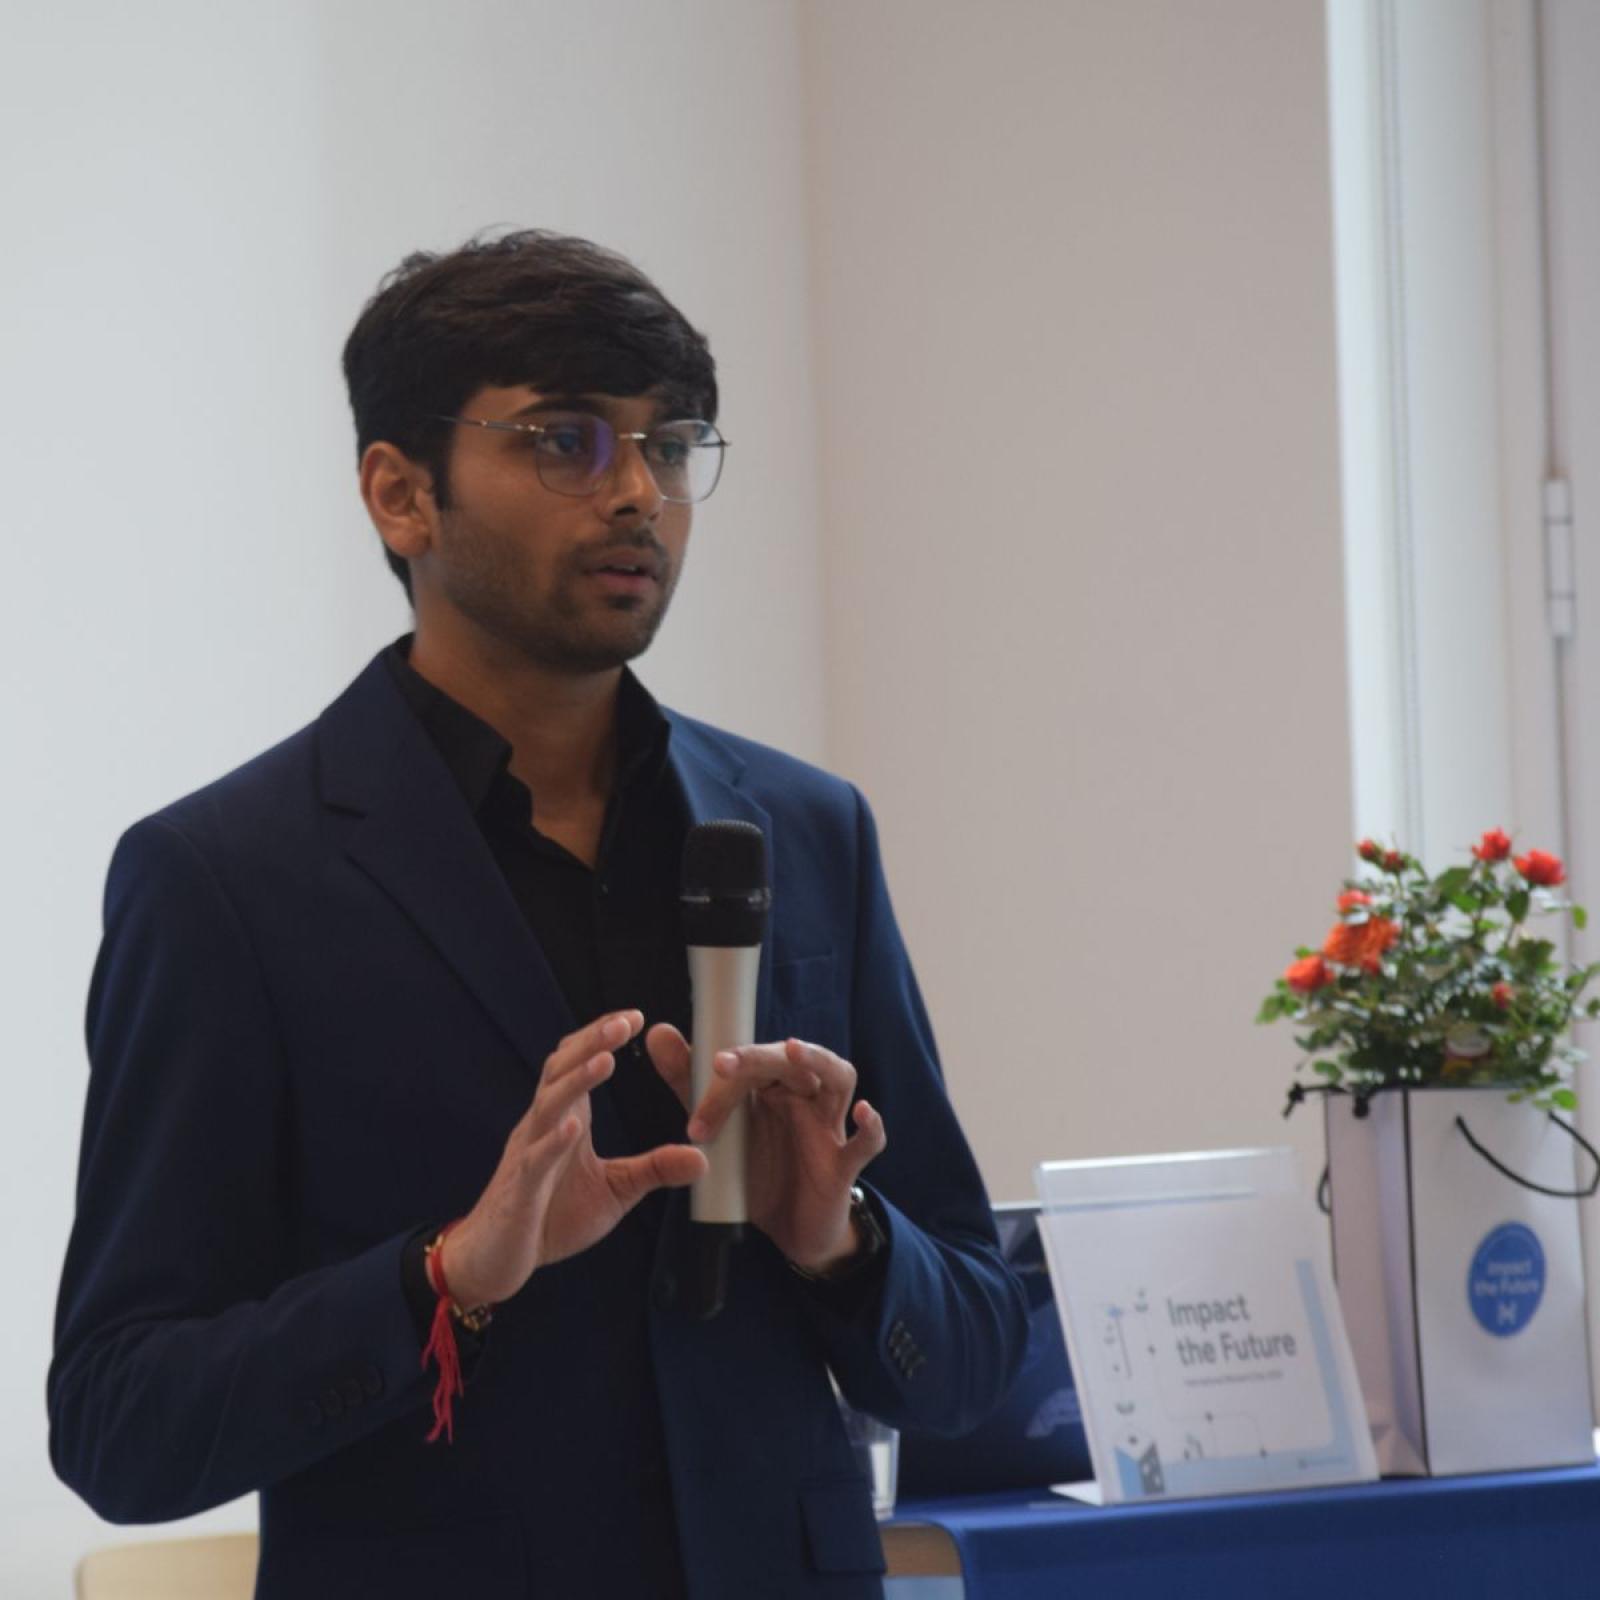 Pace student Om Gaikhe holding a microphone while giving a speech during an event presentation.